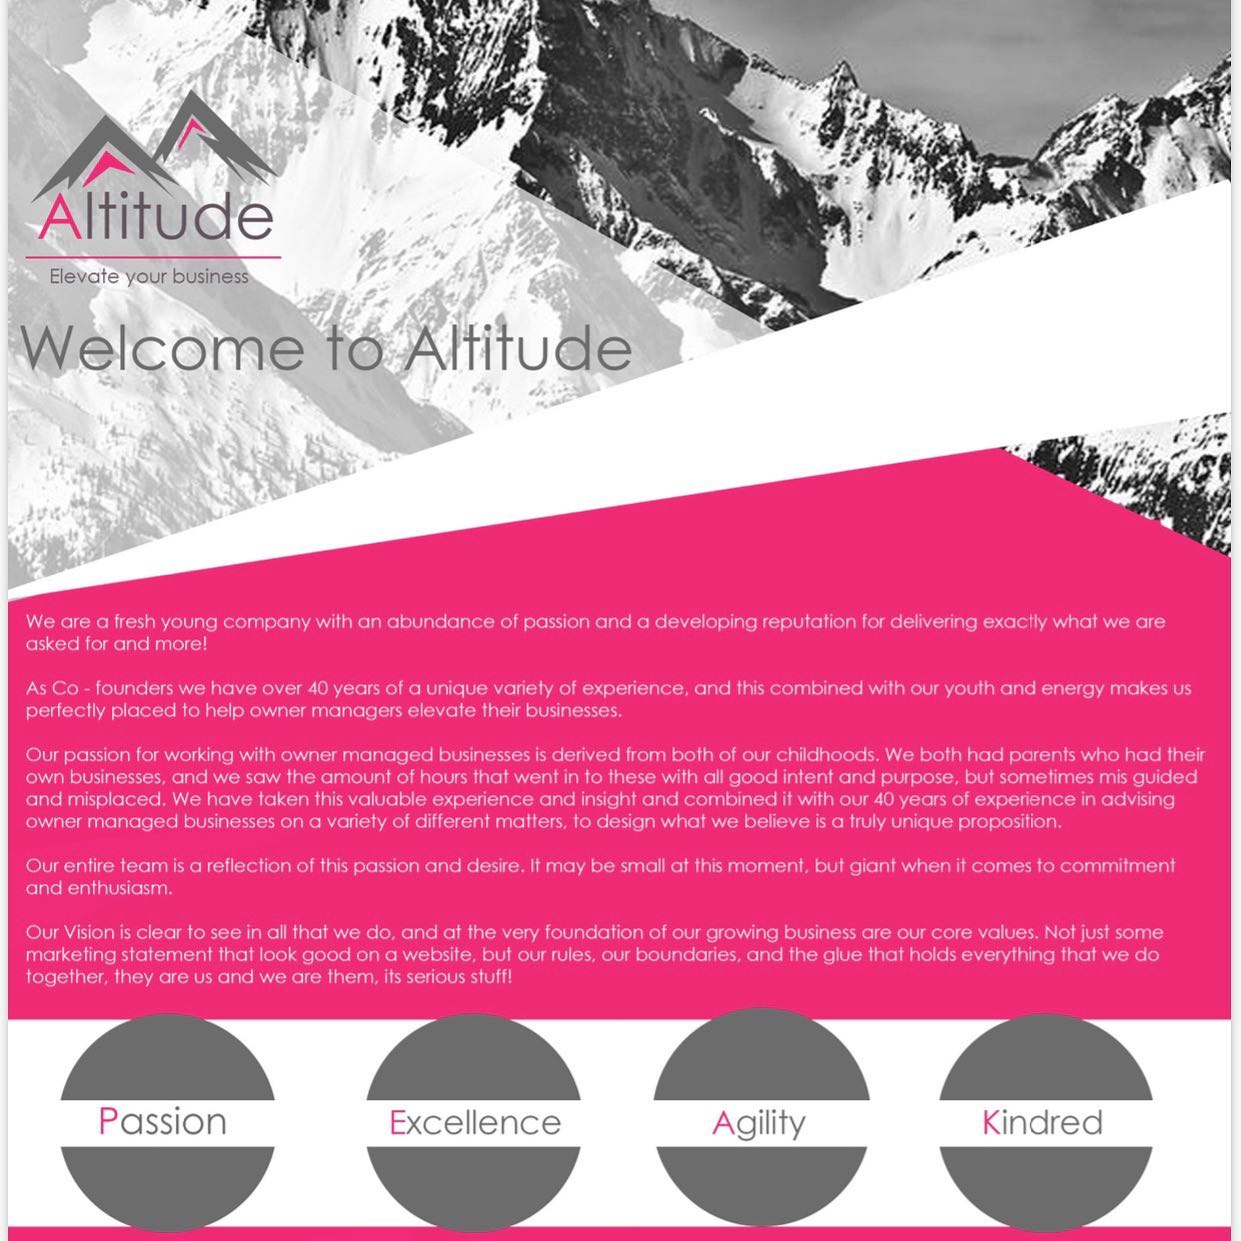 Welcome to Altitude!